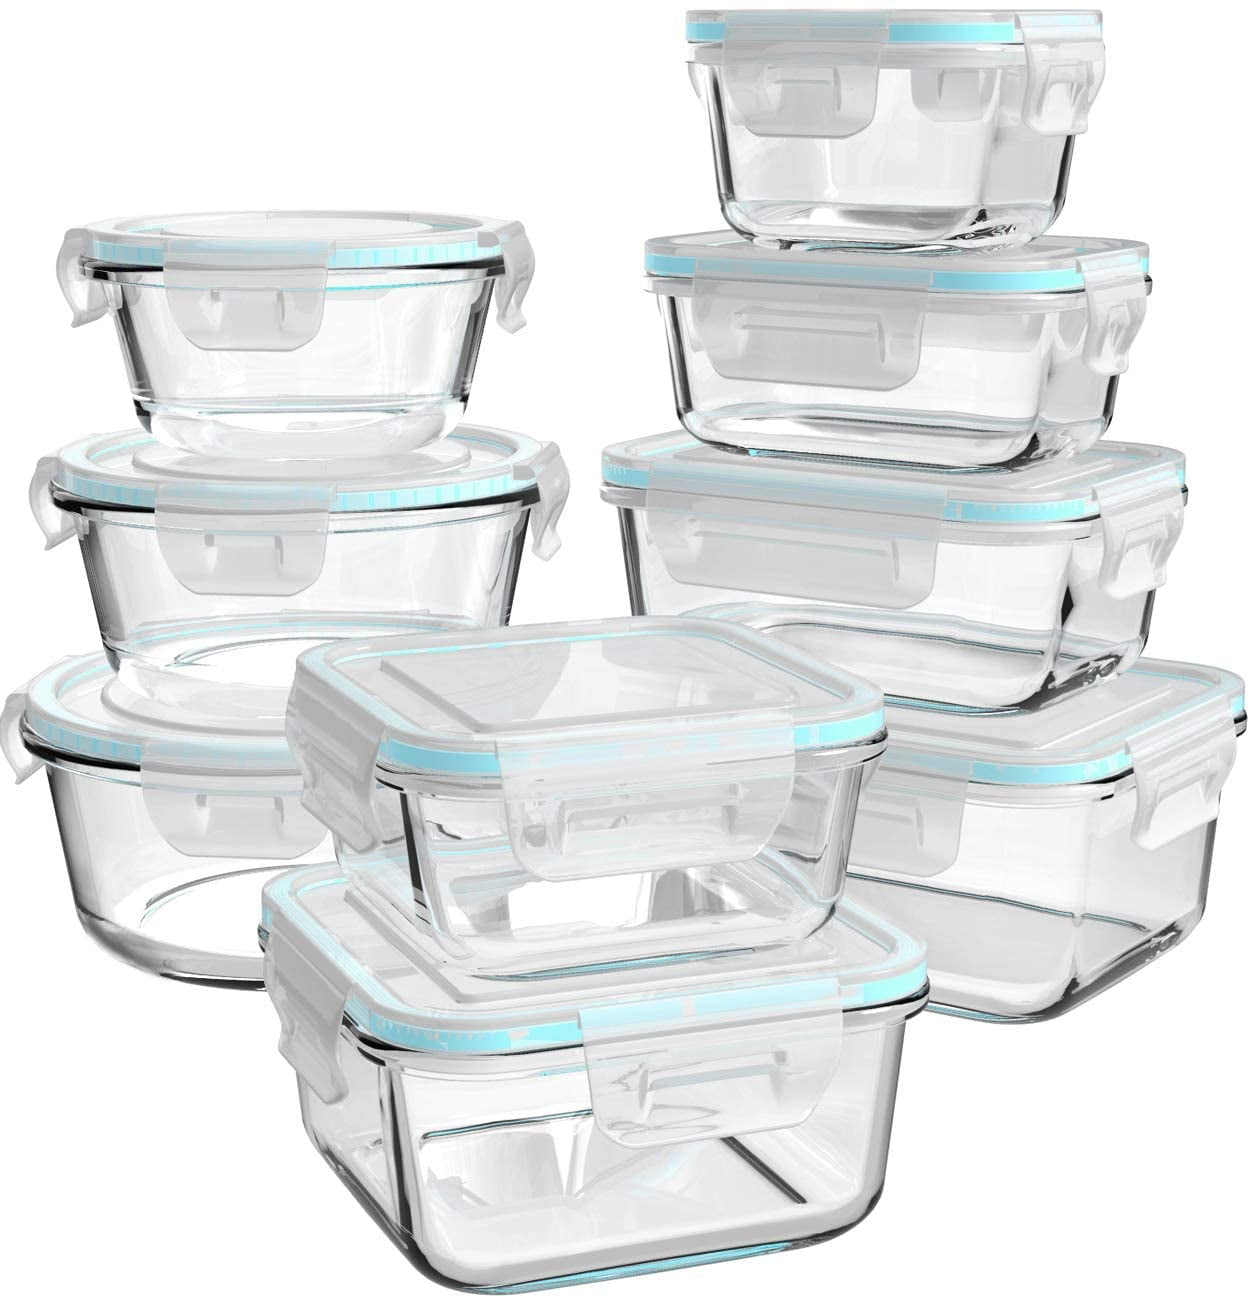  Utopia Kitchen Glass Food Storage Container Set - 18 Pieces (9  Containers and 9 Lids) - Transparent Lids (Grey, 18 Piece Set): Home &  Kitchen